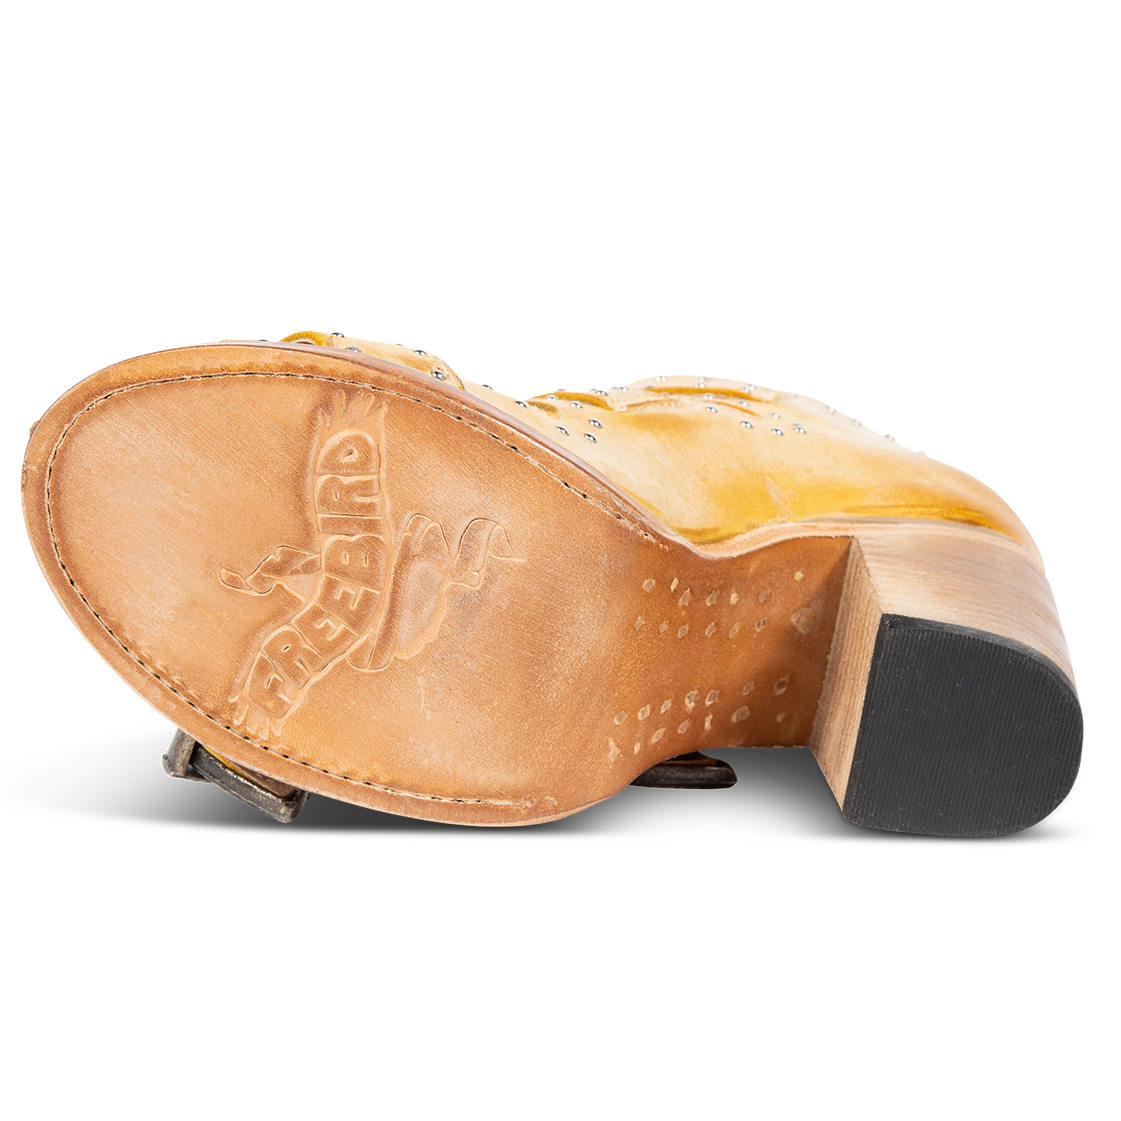 Leather sole imprinted with FREEBIRD on women's Violet banana sandal